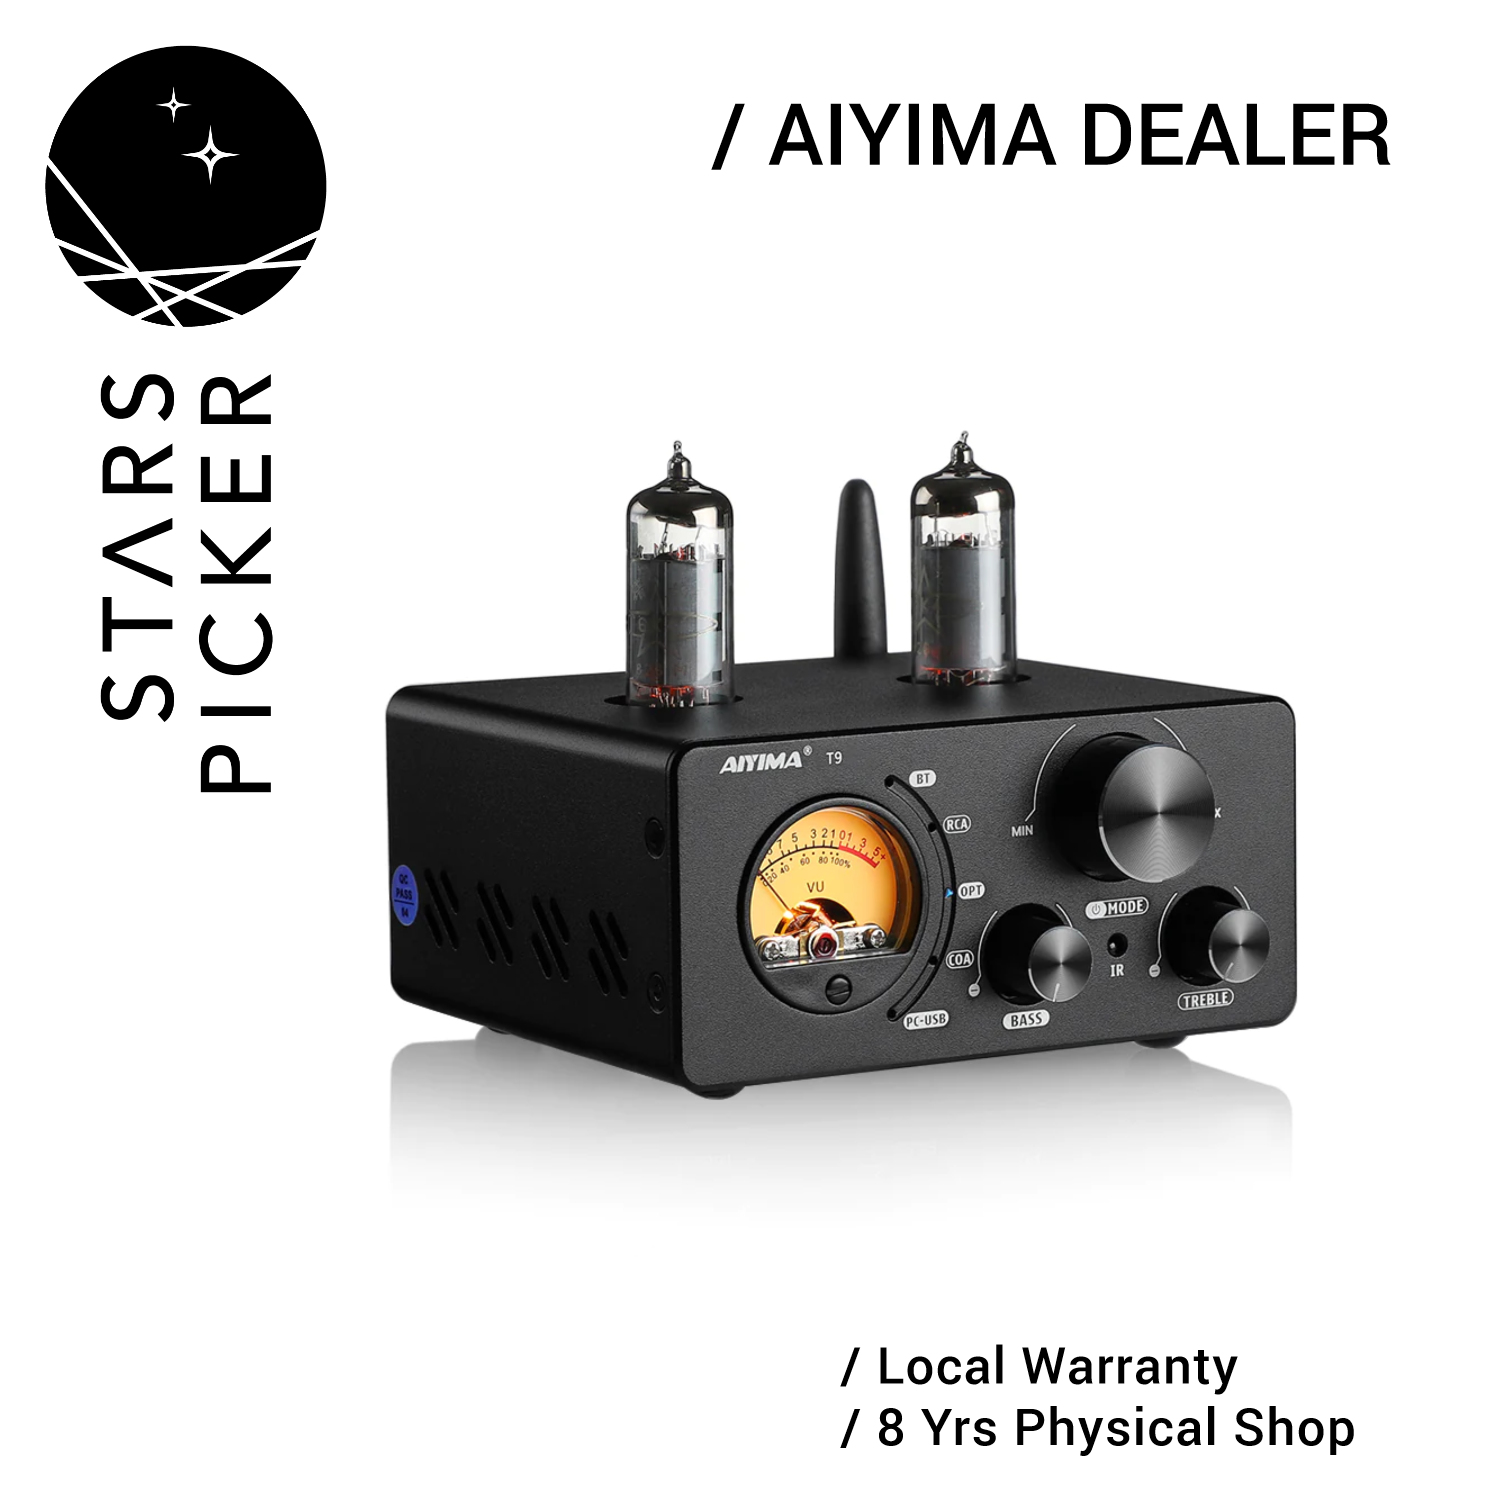 AIYIMA T9 Wireless/Wired DAC Tube Power Amplifier (4-8Ω) for Passive Speakers (include Power Adapter)